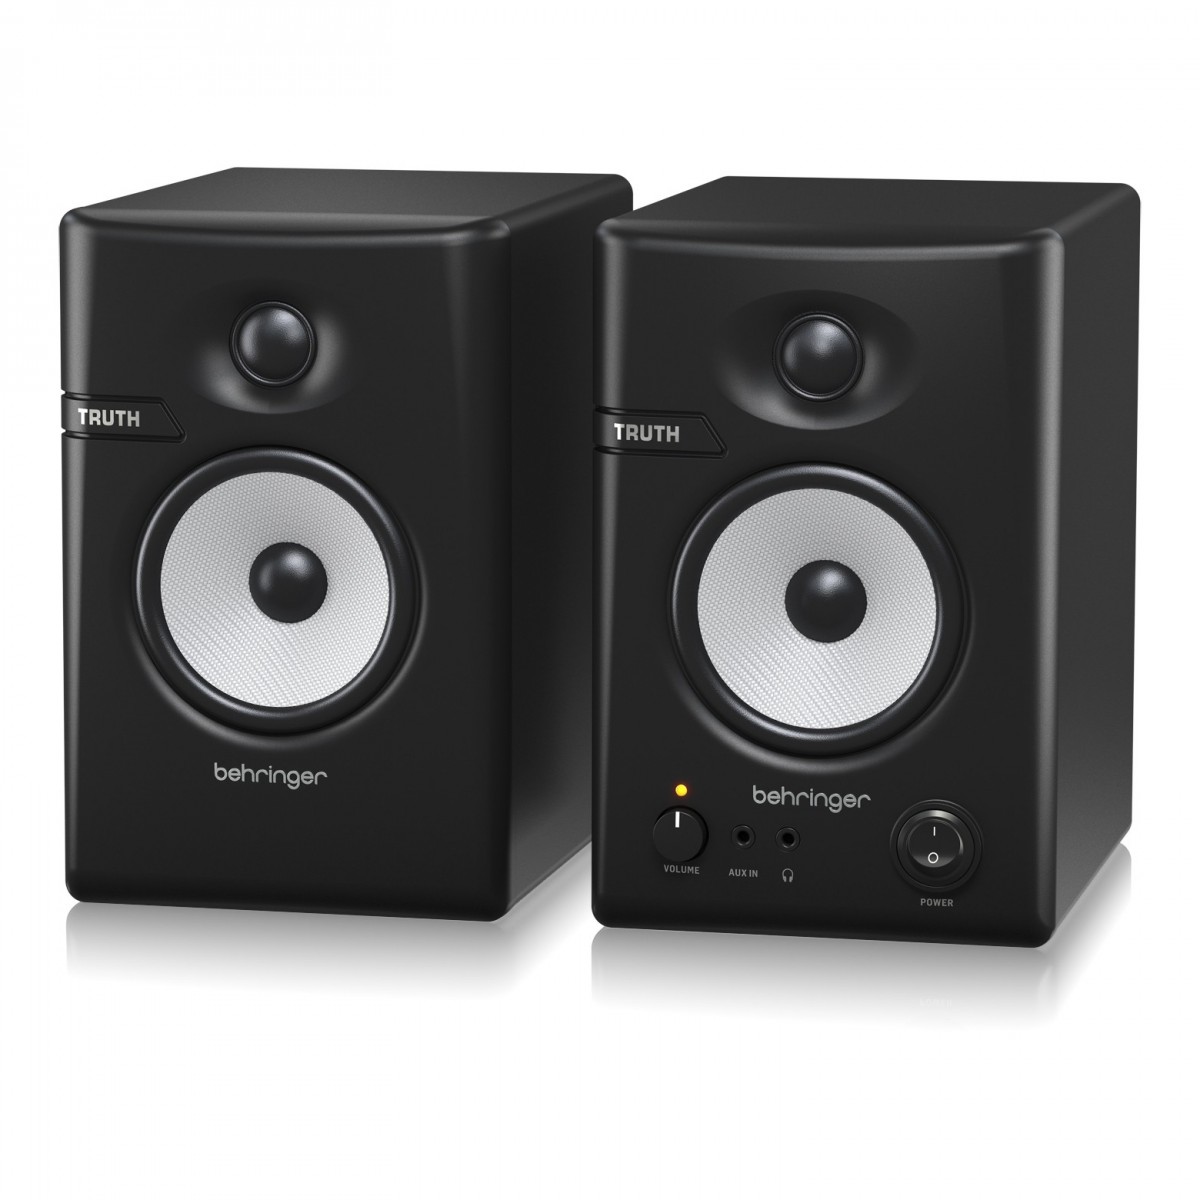 BEHRINGER TRUTH 3.5 COPPIA MONITOR STUDIO 64W WOOFER 3.5 3